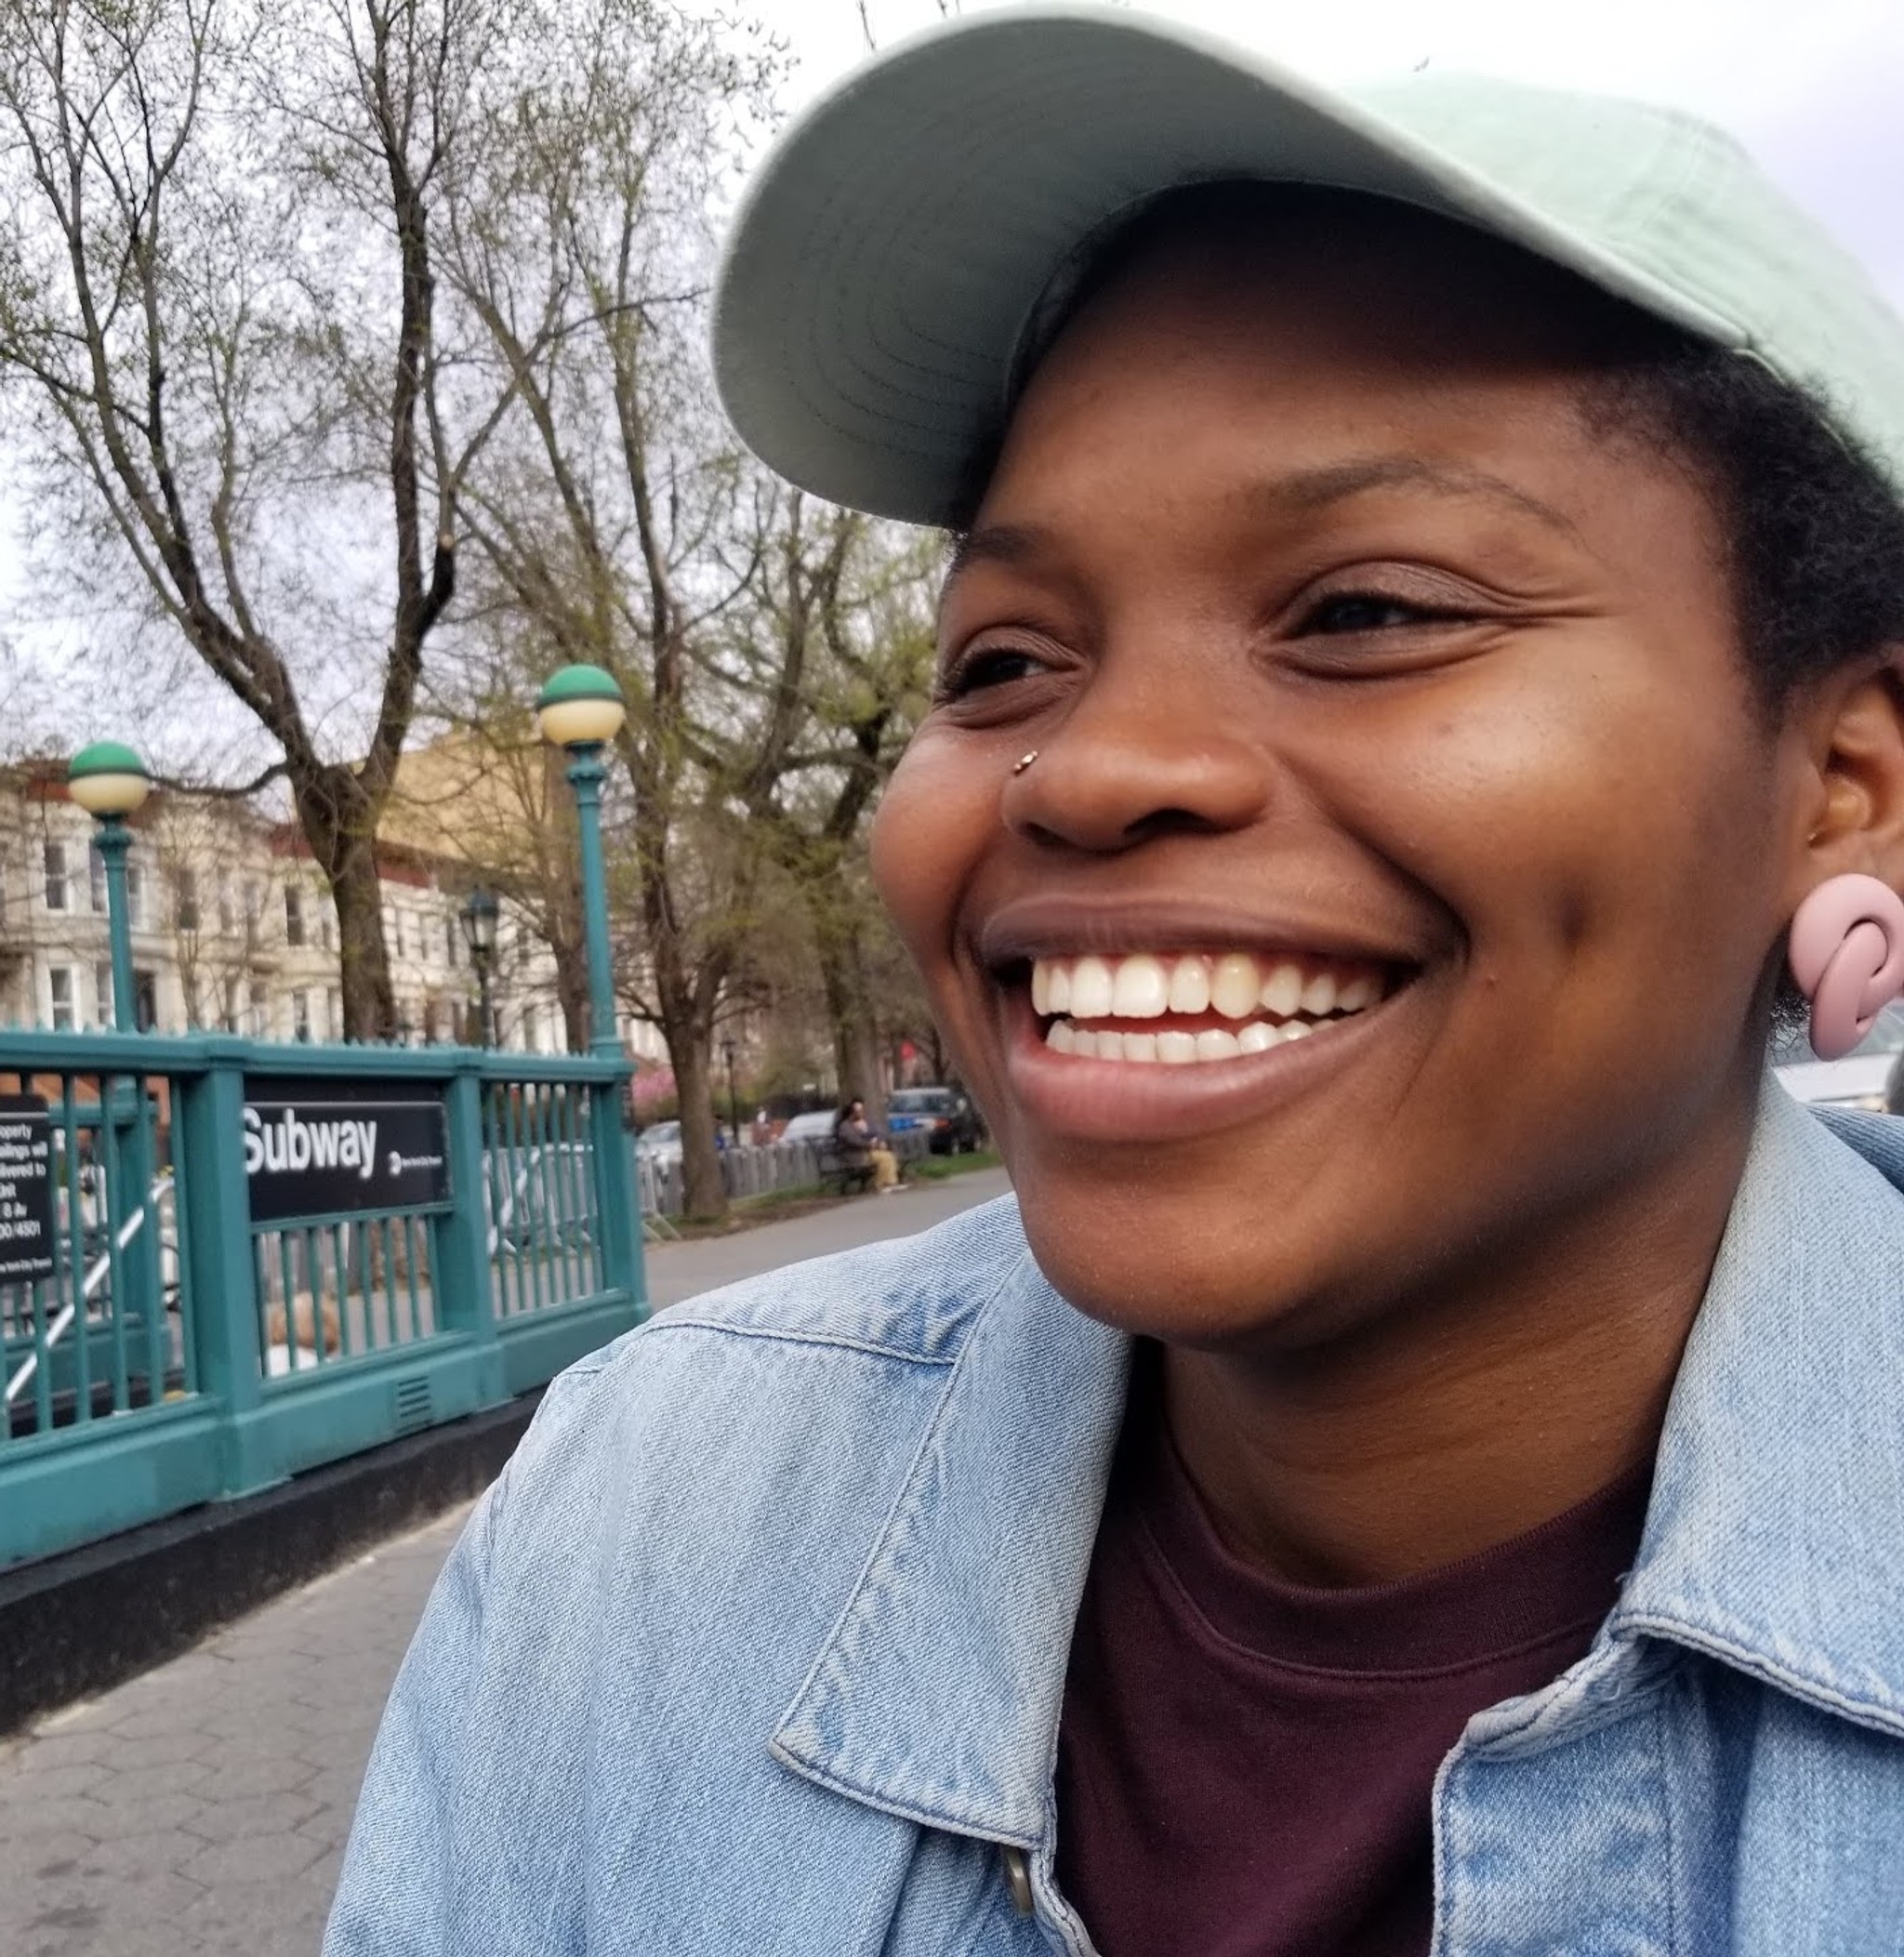 A close-up photo of a smiling Black woman, She has short hair under a pale green baseball cap and wears a blue collared shirt and pink earrings. In the background is the entrance to a New York subway station. 